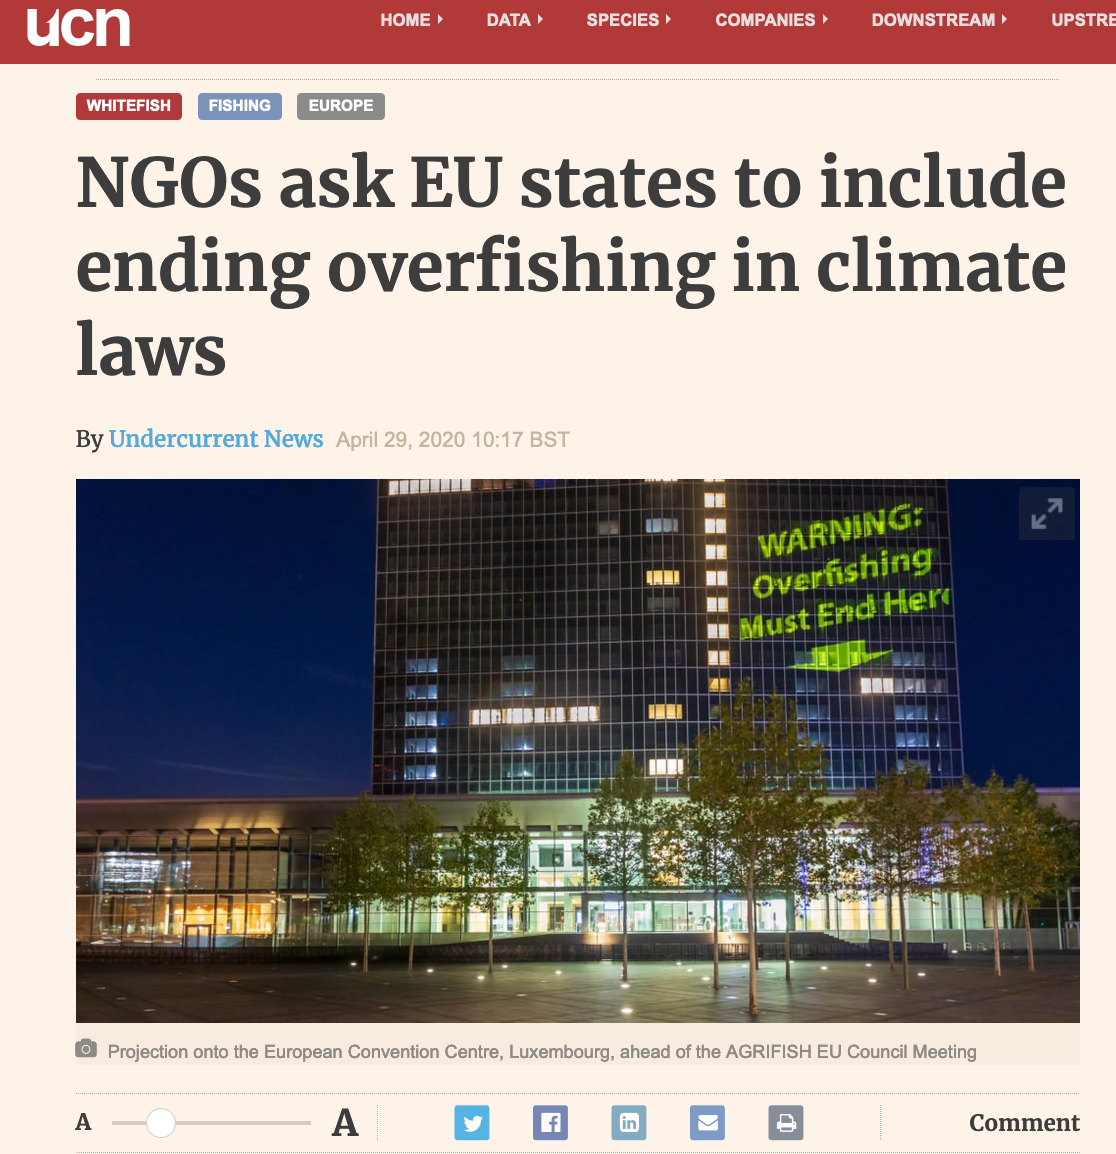 NGOs ask EU states to include ending overfishing in climate laws